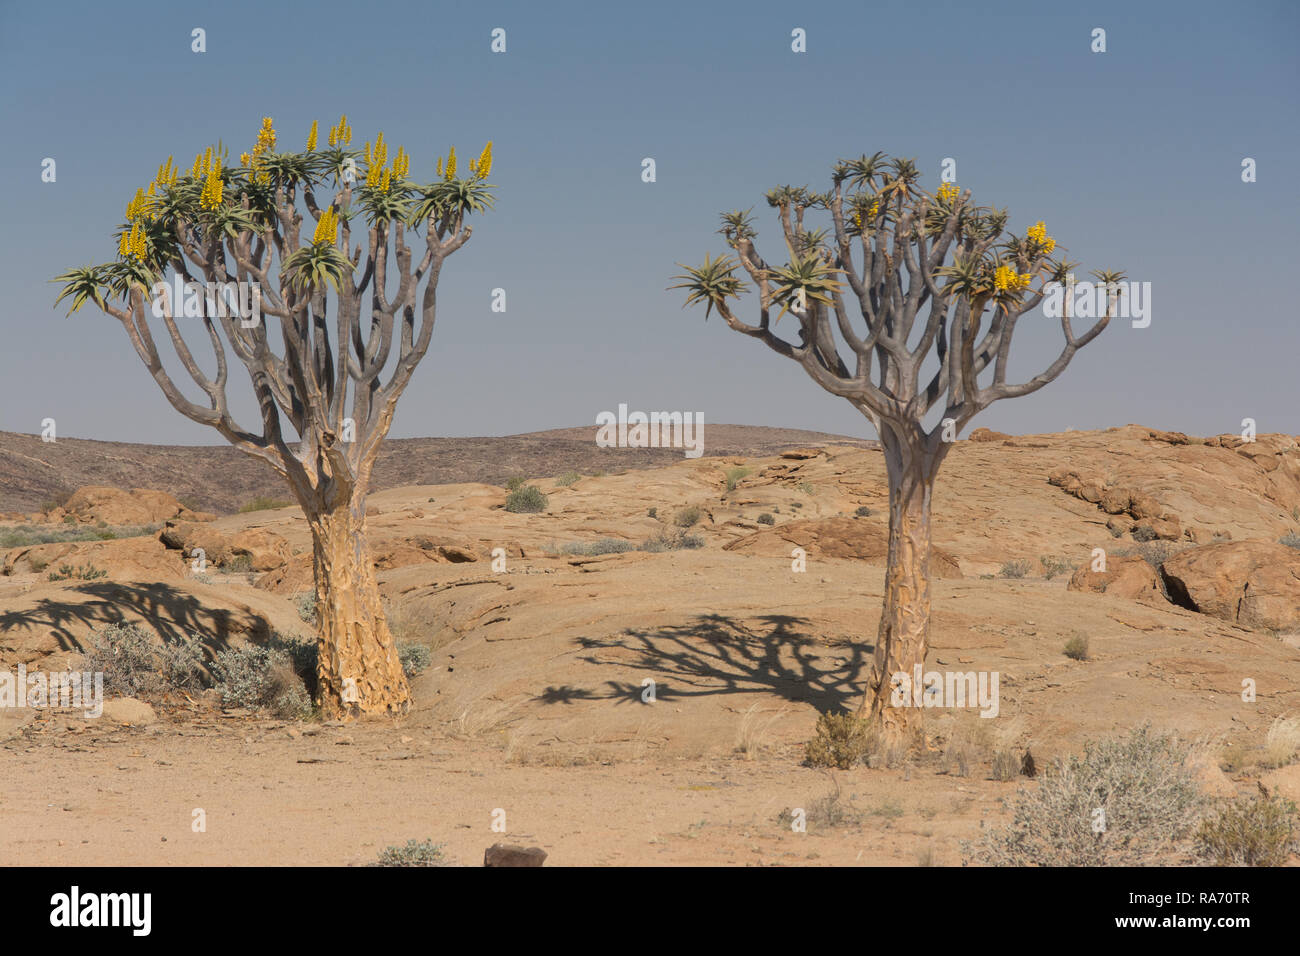 Quiver tree in the namibien desert Stock Photo